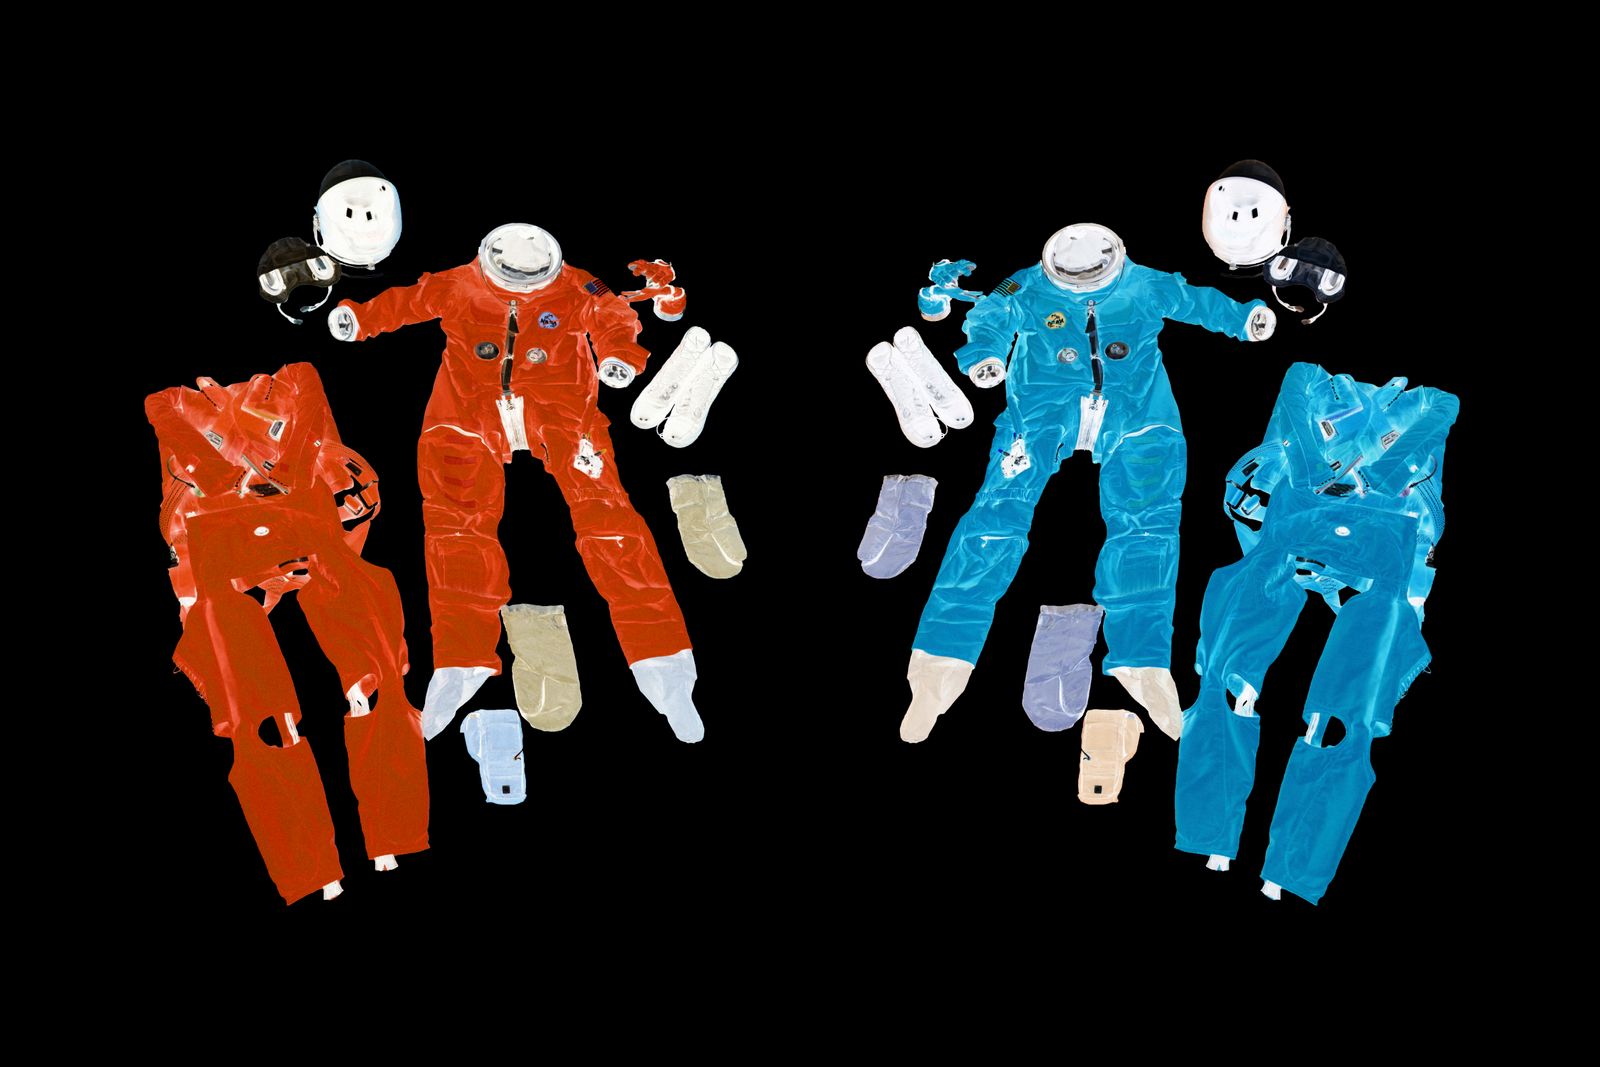 © Mackenzie Calle - Manipulated NASA image of advanced crew escape suits, used since 1994 on Space Shuttle Missions.